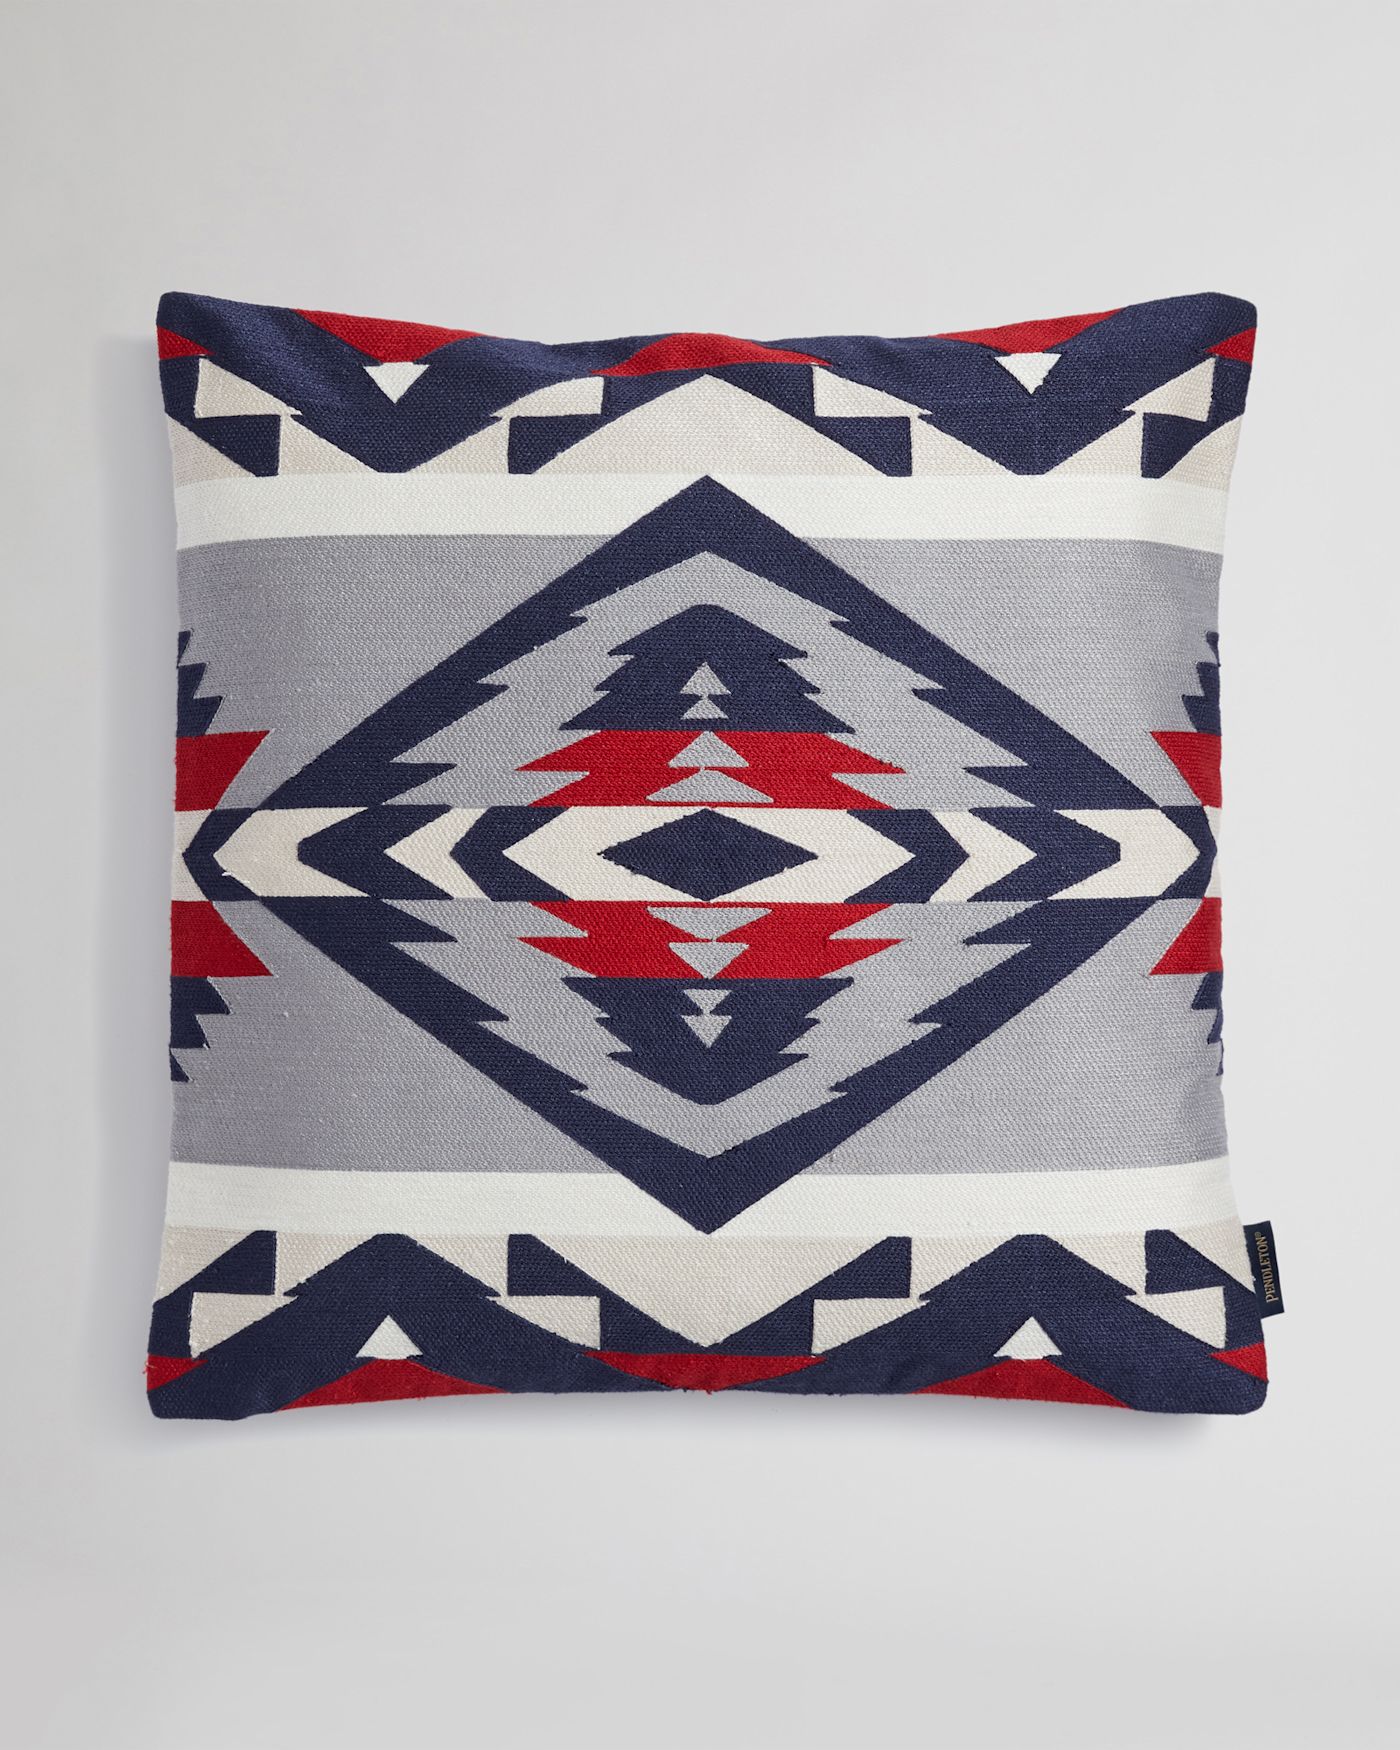 TECOPA HILLS EMBROIDERED SQUARE PILLOW